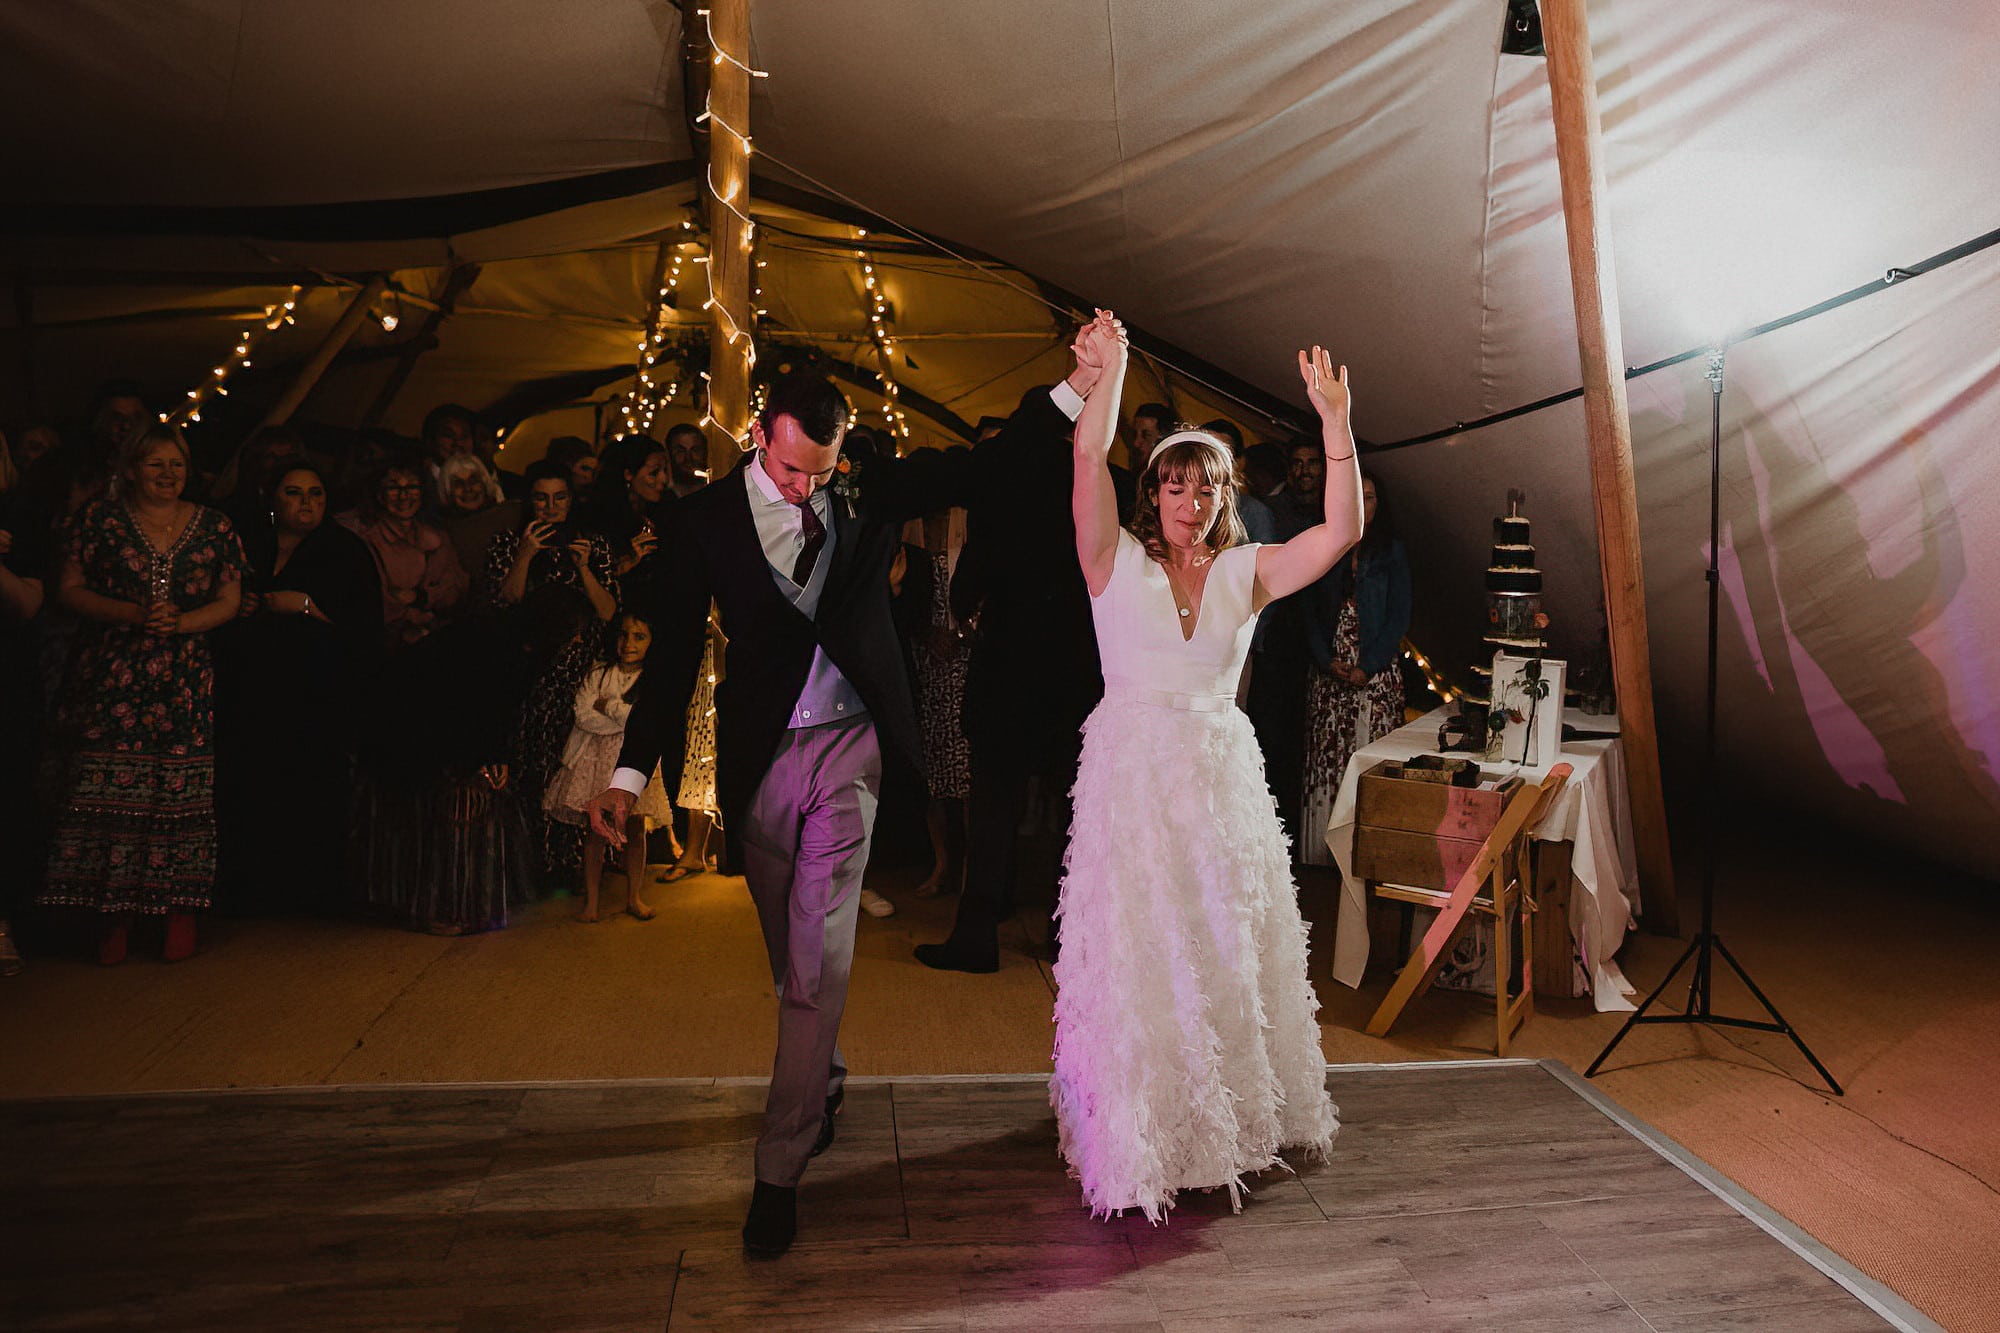 bride and groom first dance at tipi wedding